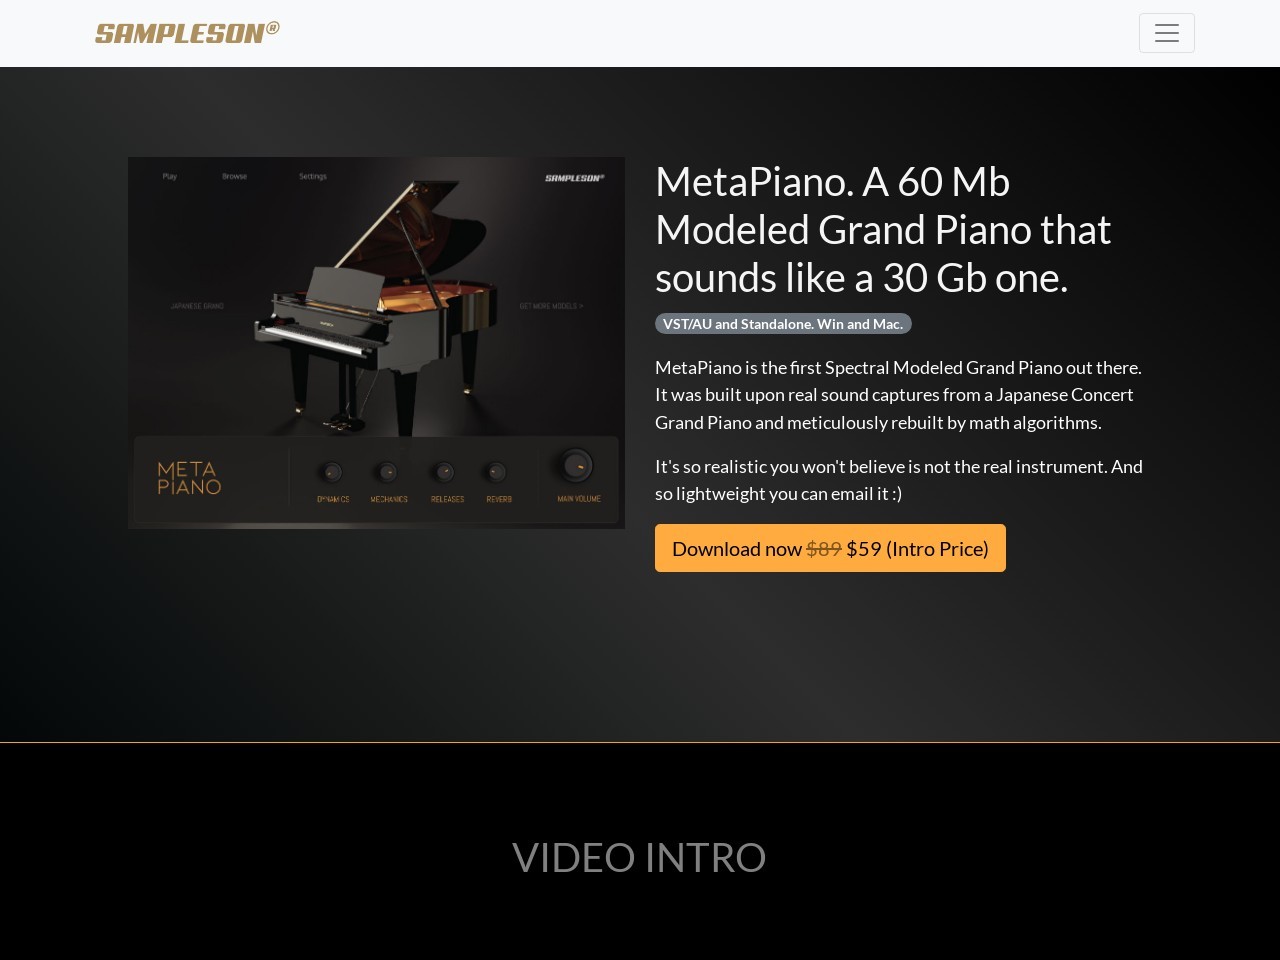 MetaPiano. The first Spectral Modeled Grand Piano | Sampleson